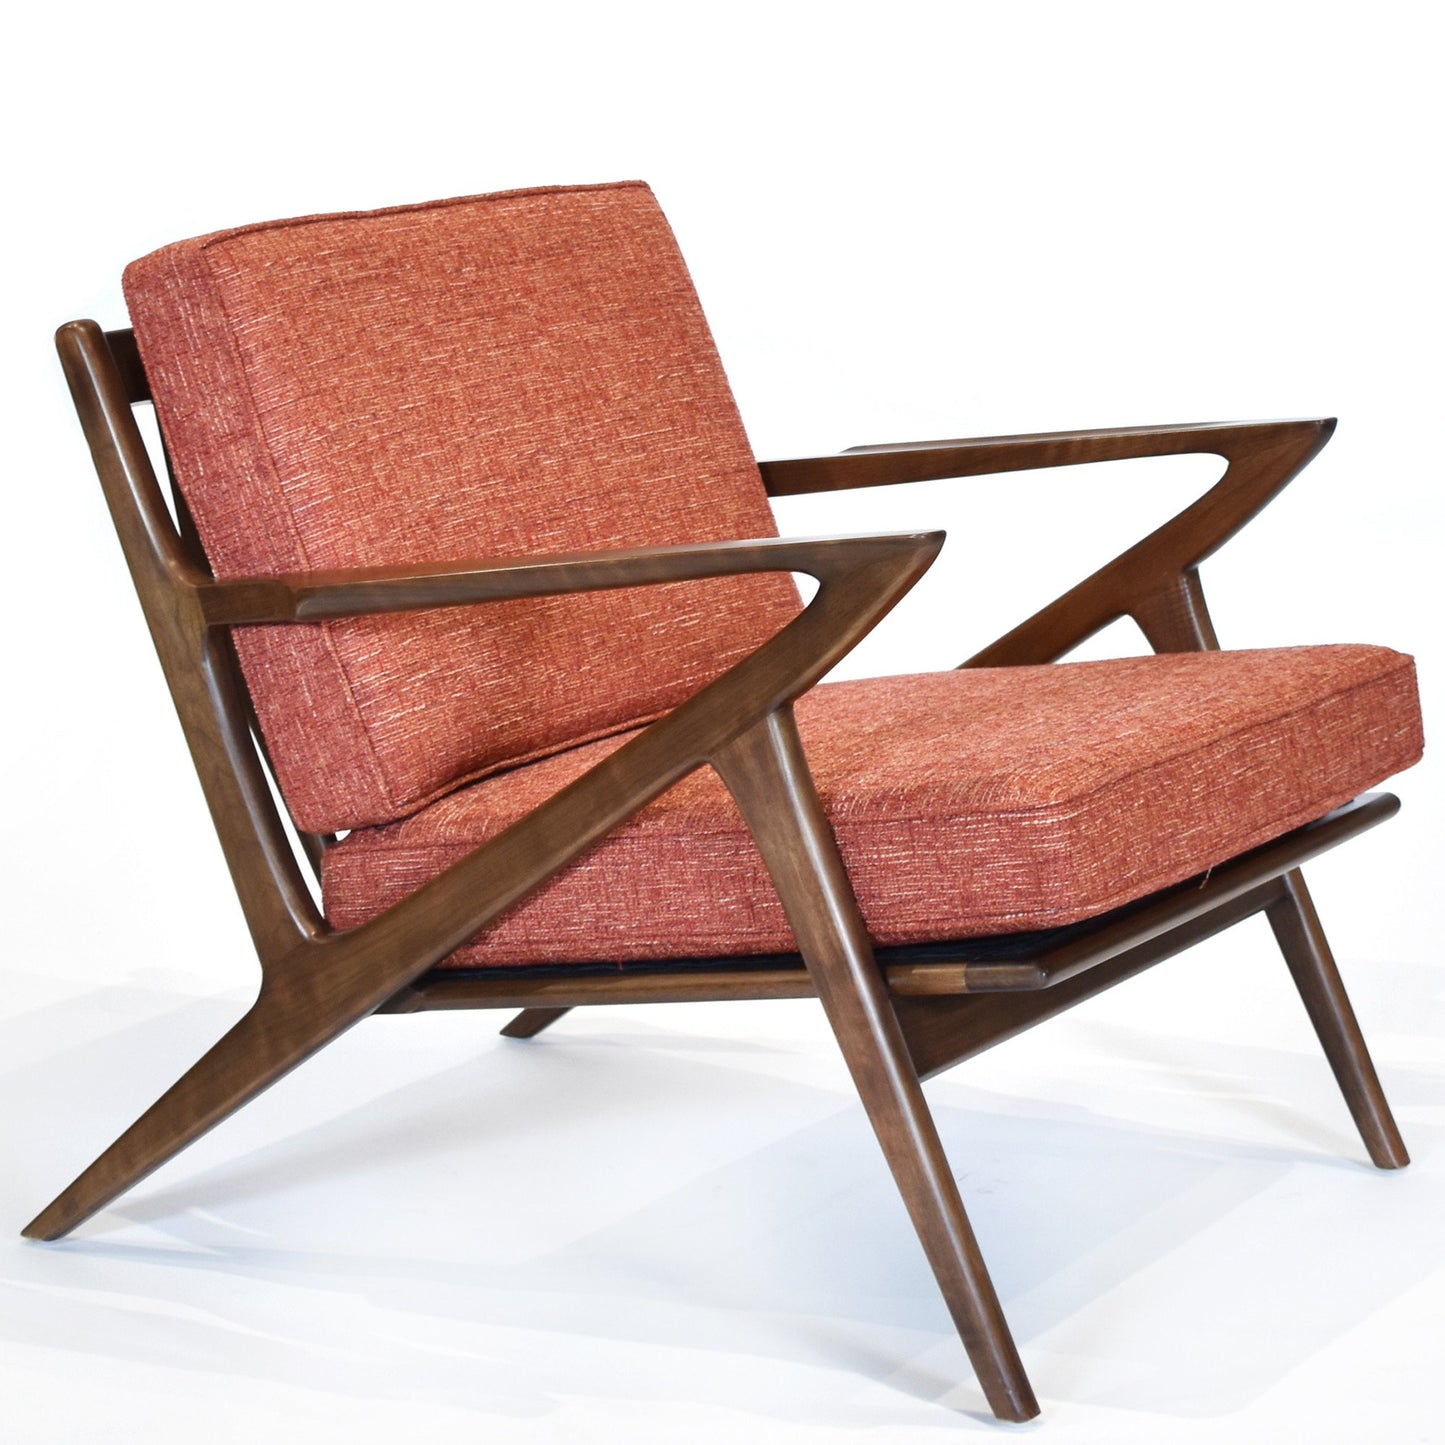 Load image into Gallery viewer, Z Lounge Chair - Walnut Picante Gingko Furniture  Picante   Four Hands, Burke Decor, Mid Century Modern Furniture, Old Bones Furniture Company, Old Bones Co, Modern Mid Century, Designer Furniture, https://www.oldbonesco.com/
